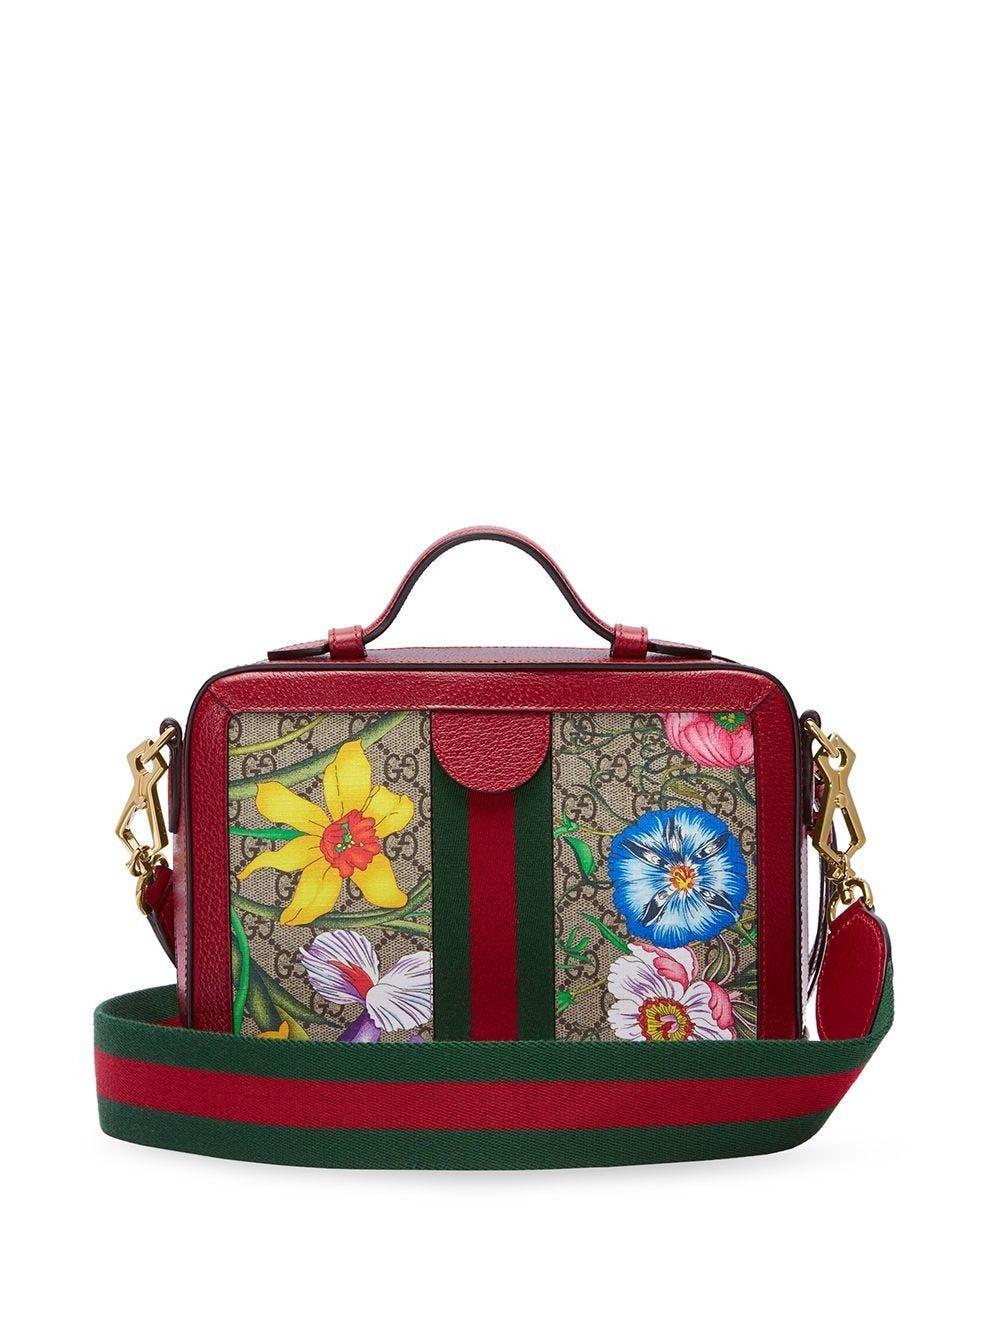 Gucci Ophidia GG Flora Small Shoulder Bag in Red | Lyst